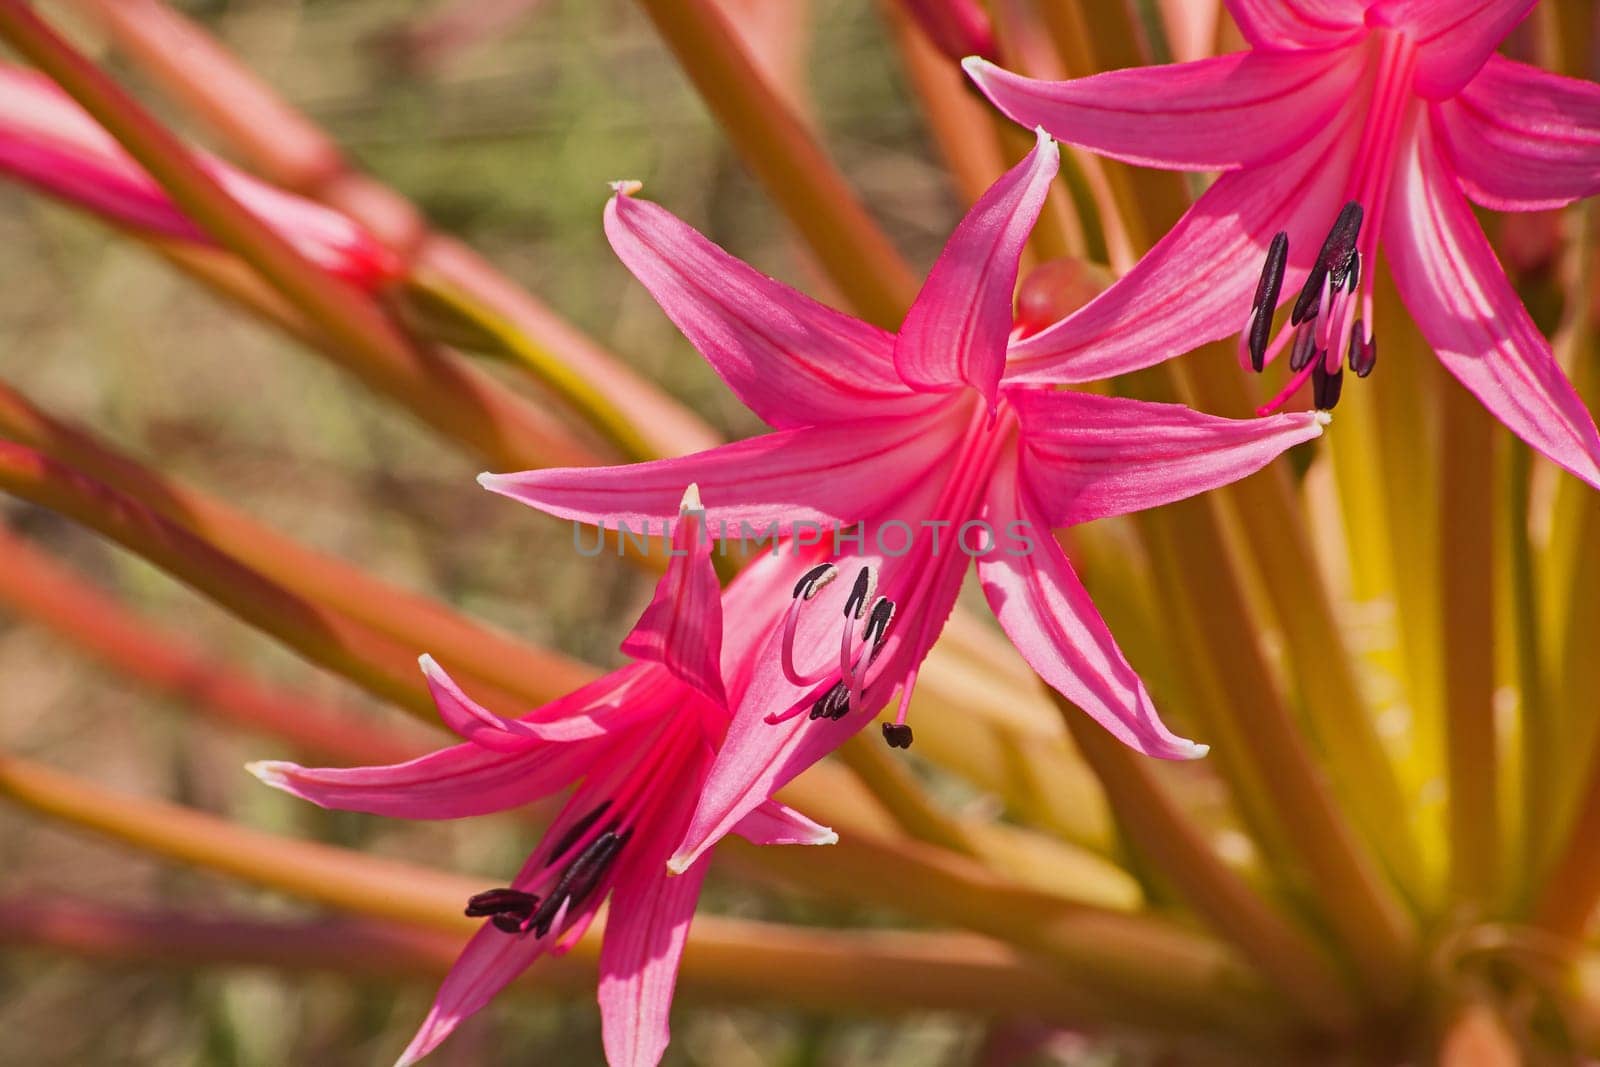 A macro image of the flowers of Nerine laticoma photographed at Walter Sisulu Botanical Gardens in Johannesburg South Africa